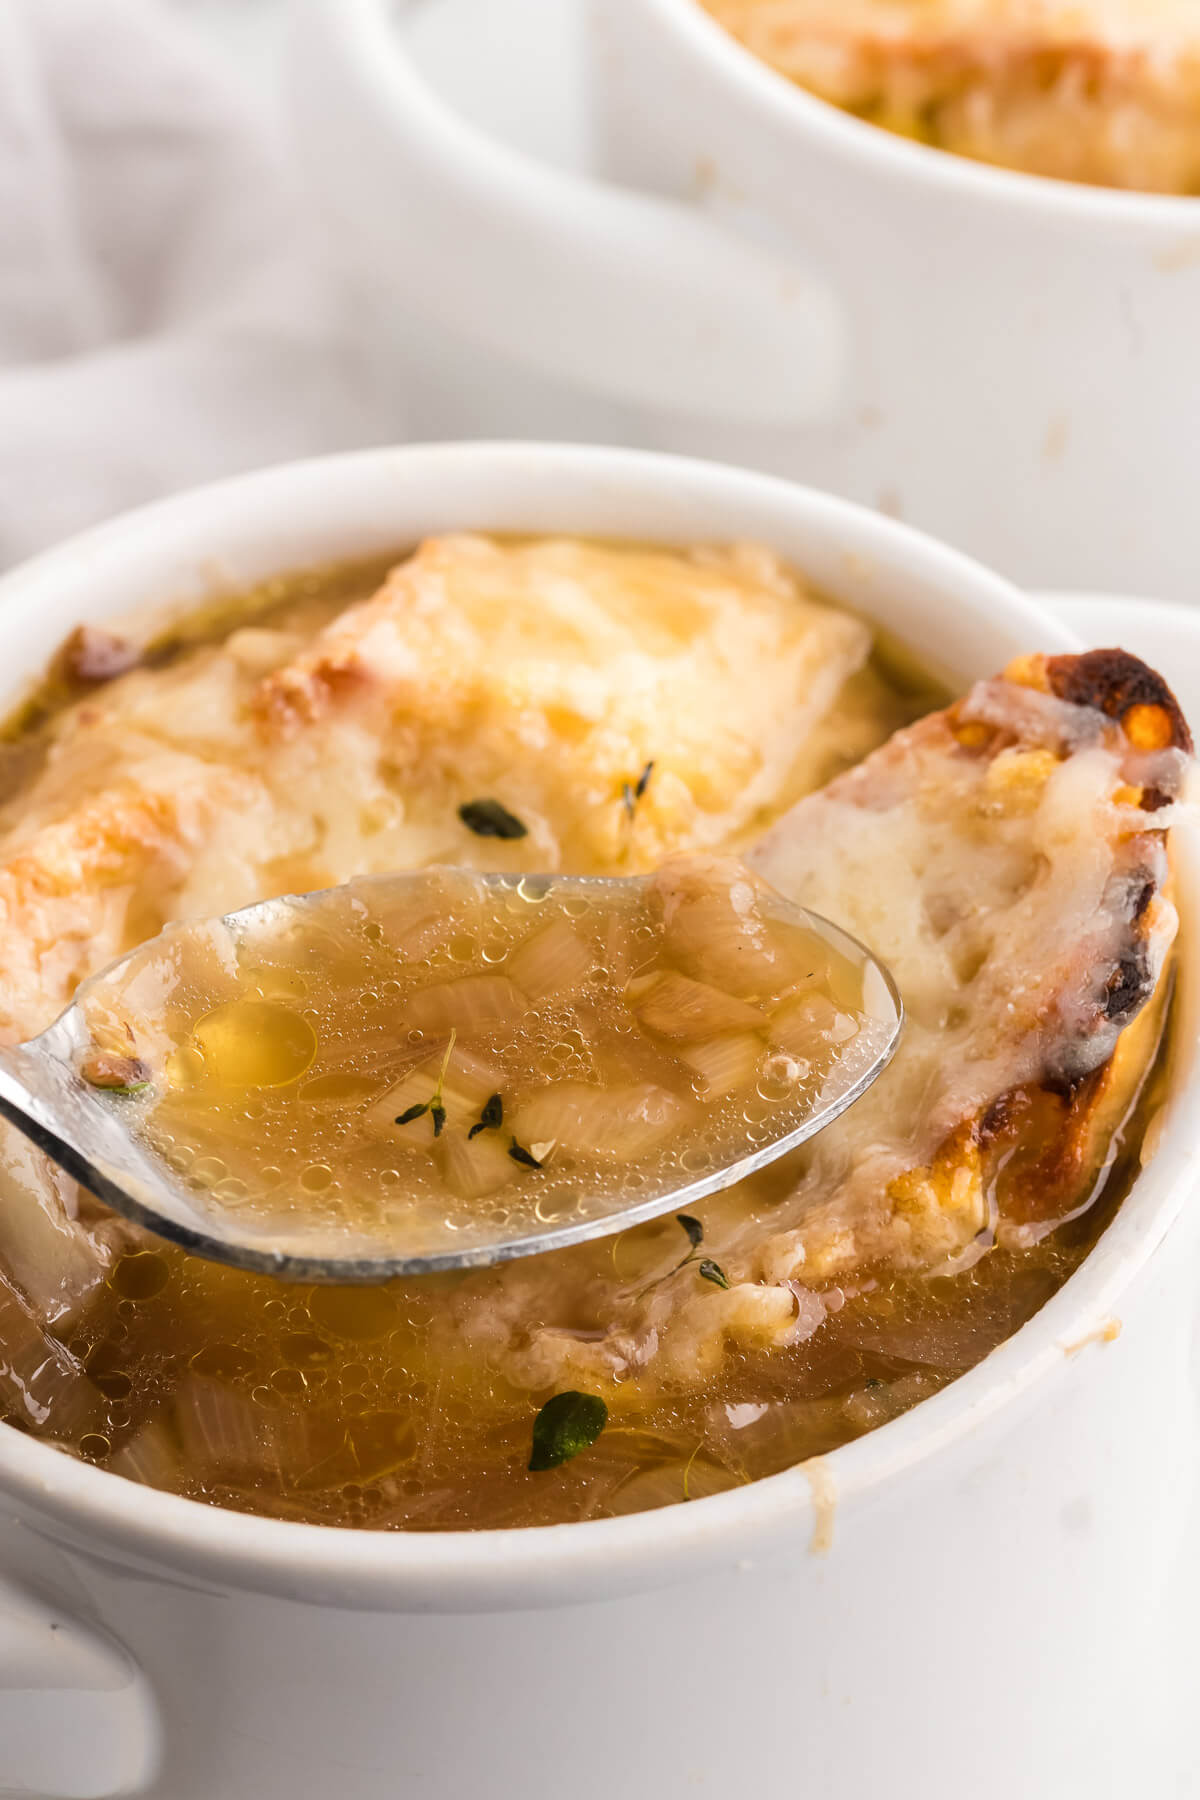 a spoonful of French onion soup with rich broth and gooey cheese.